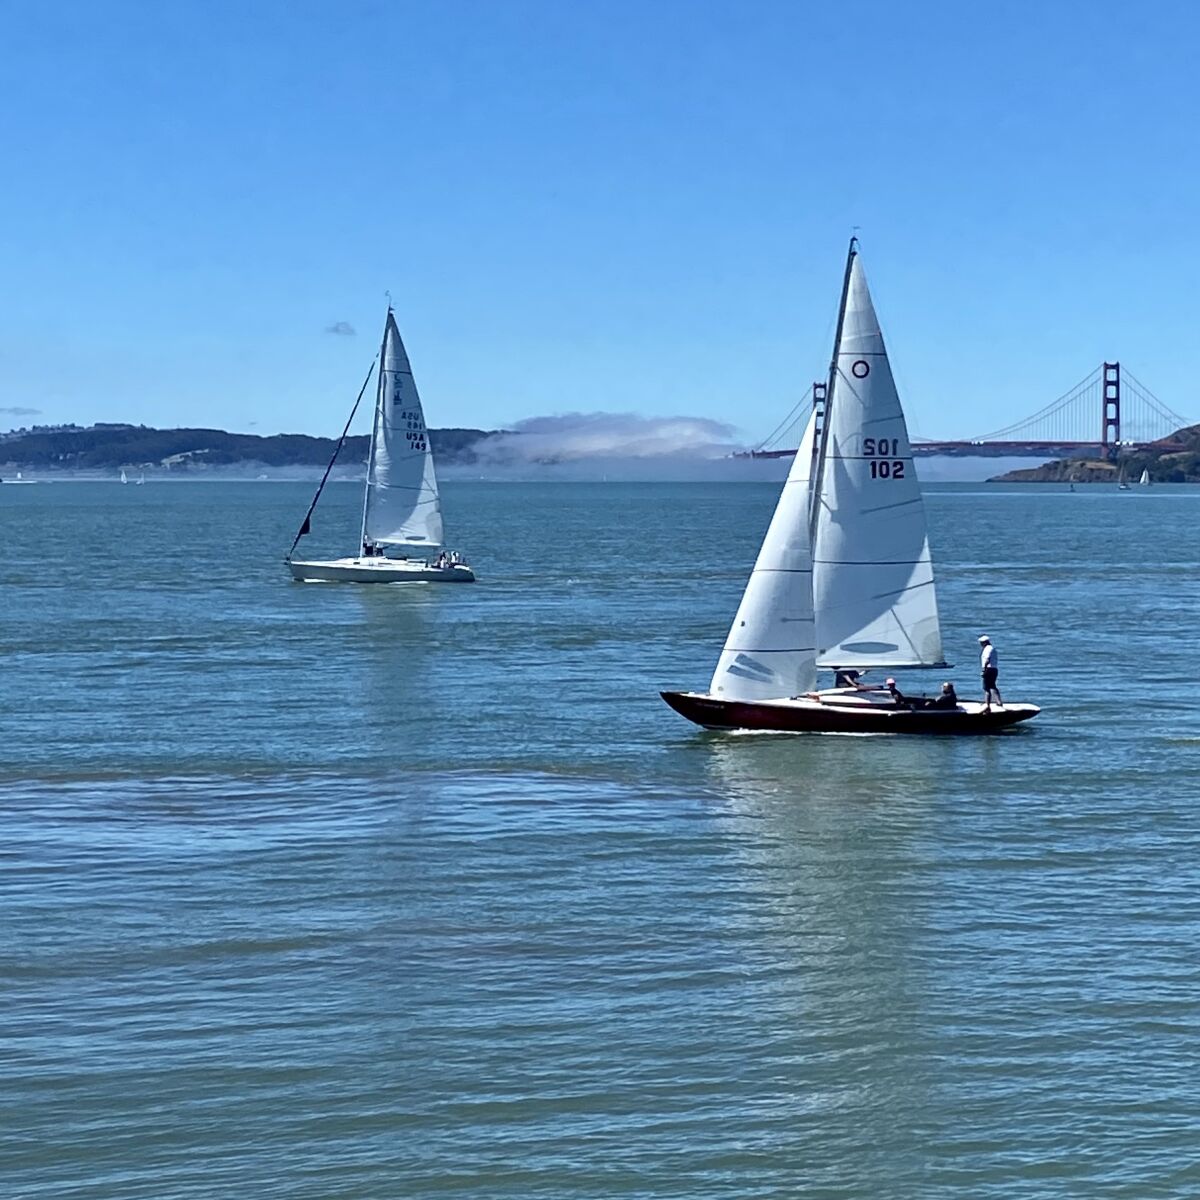 Boats sail in the San Francisco Bay with the Golden Gate Bridge visible in the background.